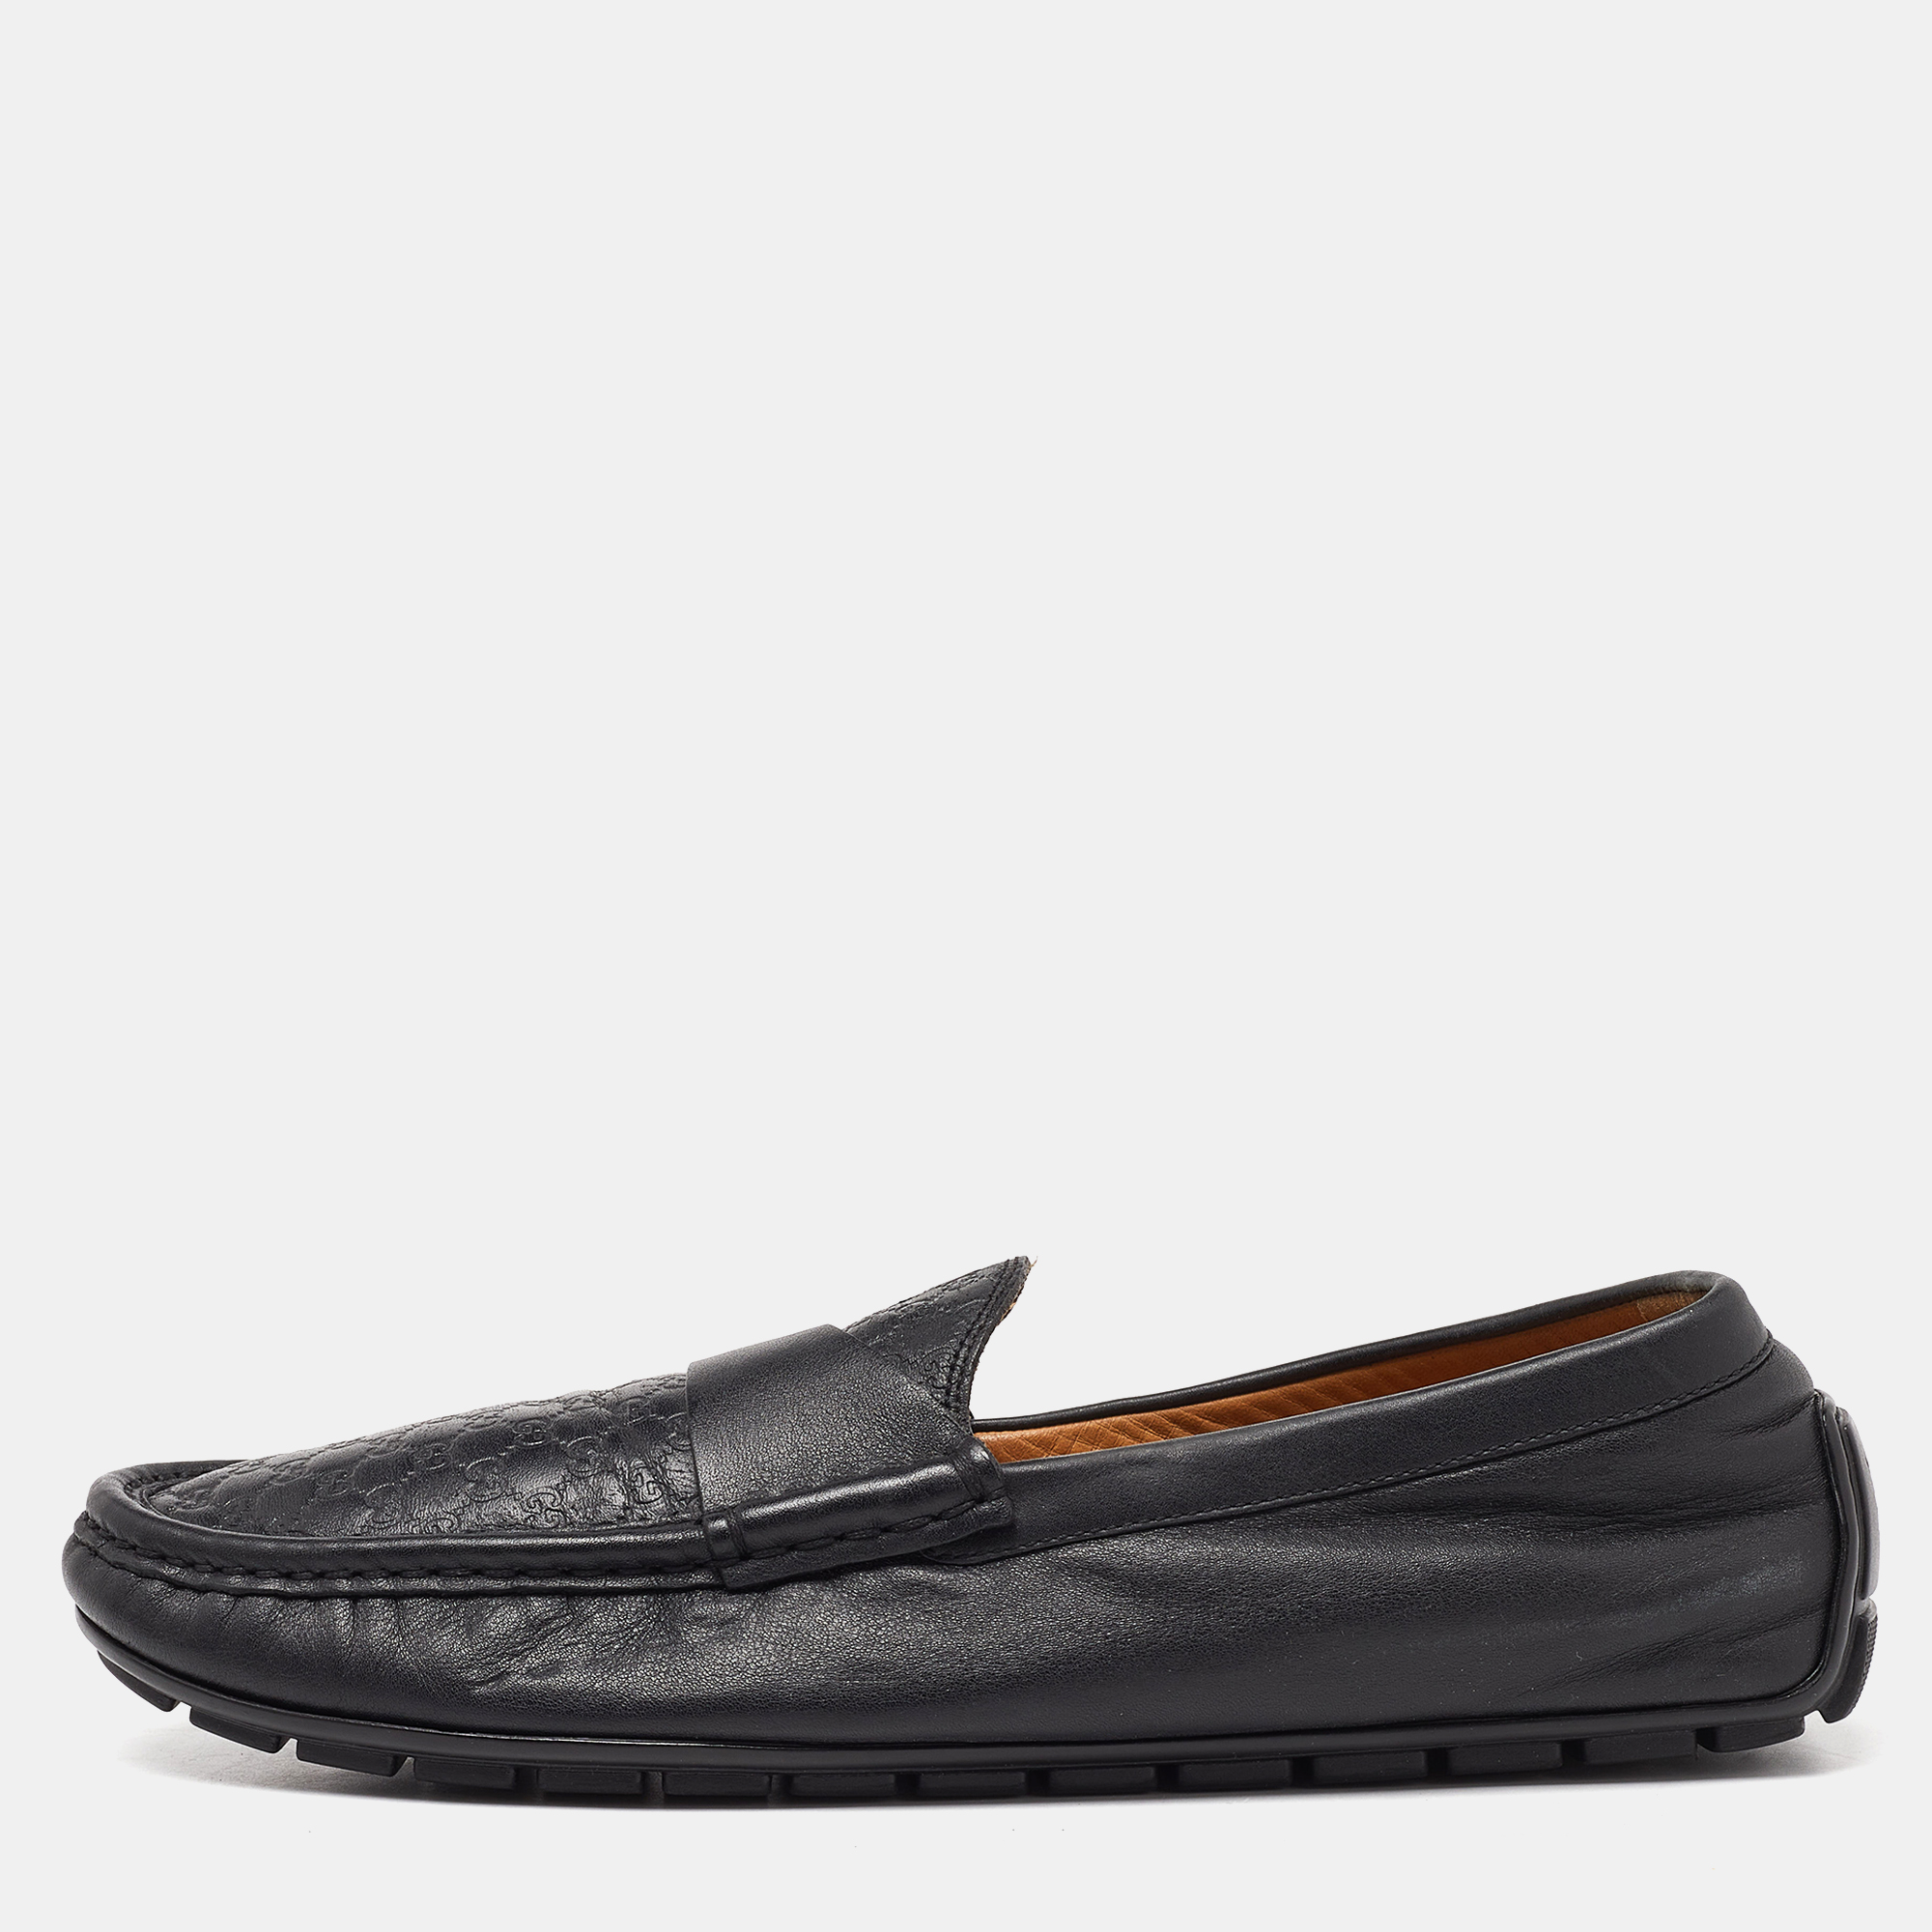 Gucci Black Guccissima Leather Slip On Loafers Size 41